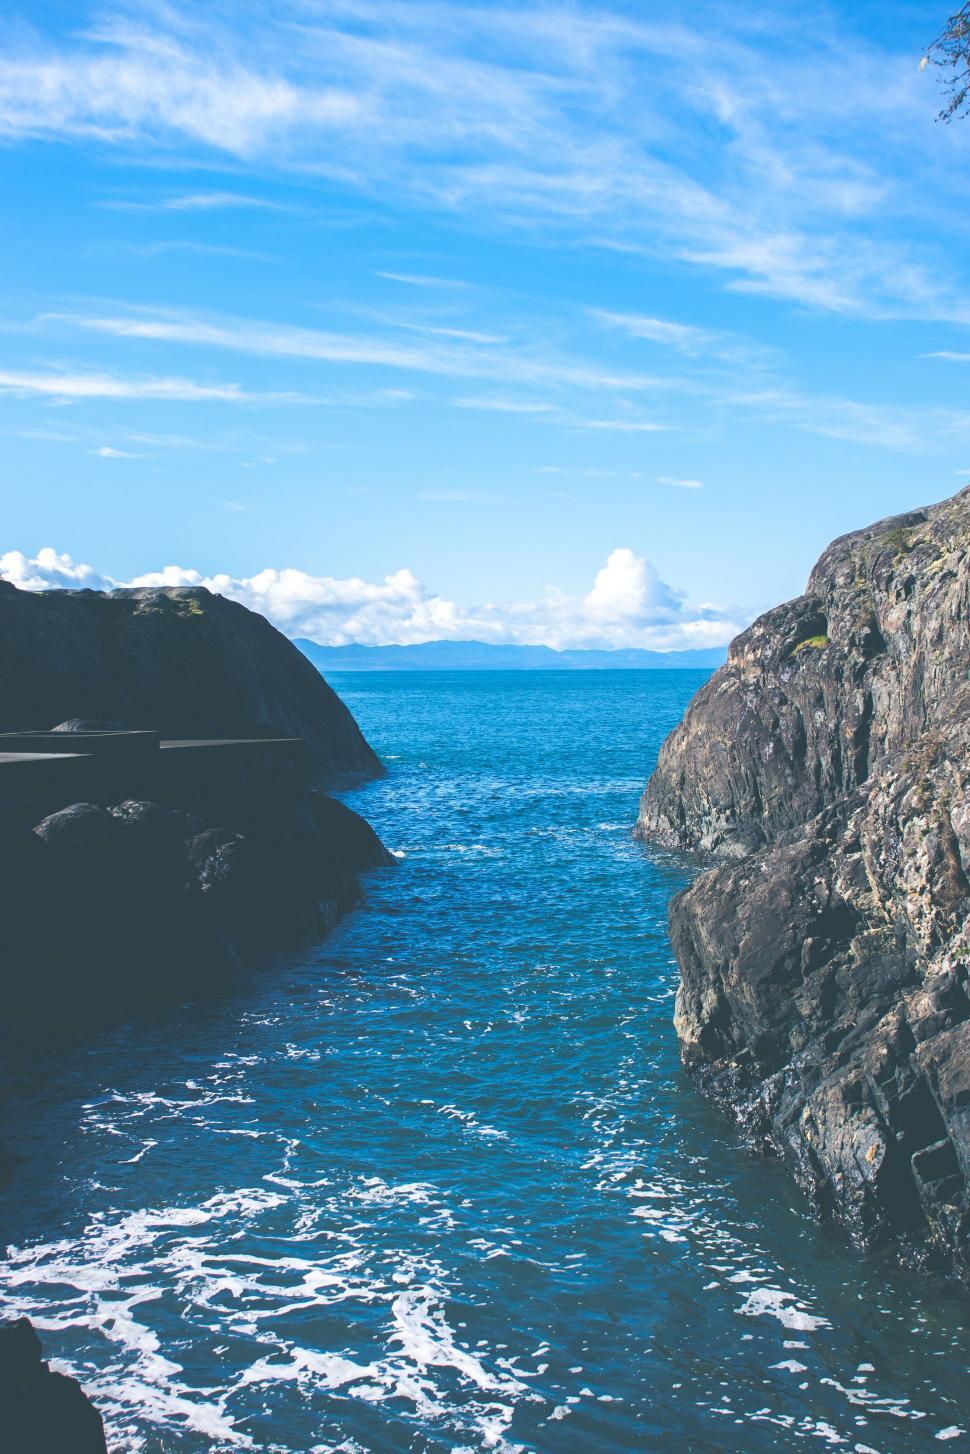 Free Image of Man Standing on Cliff Next to Ocean 